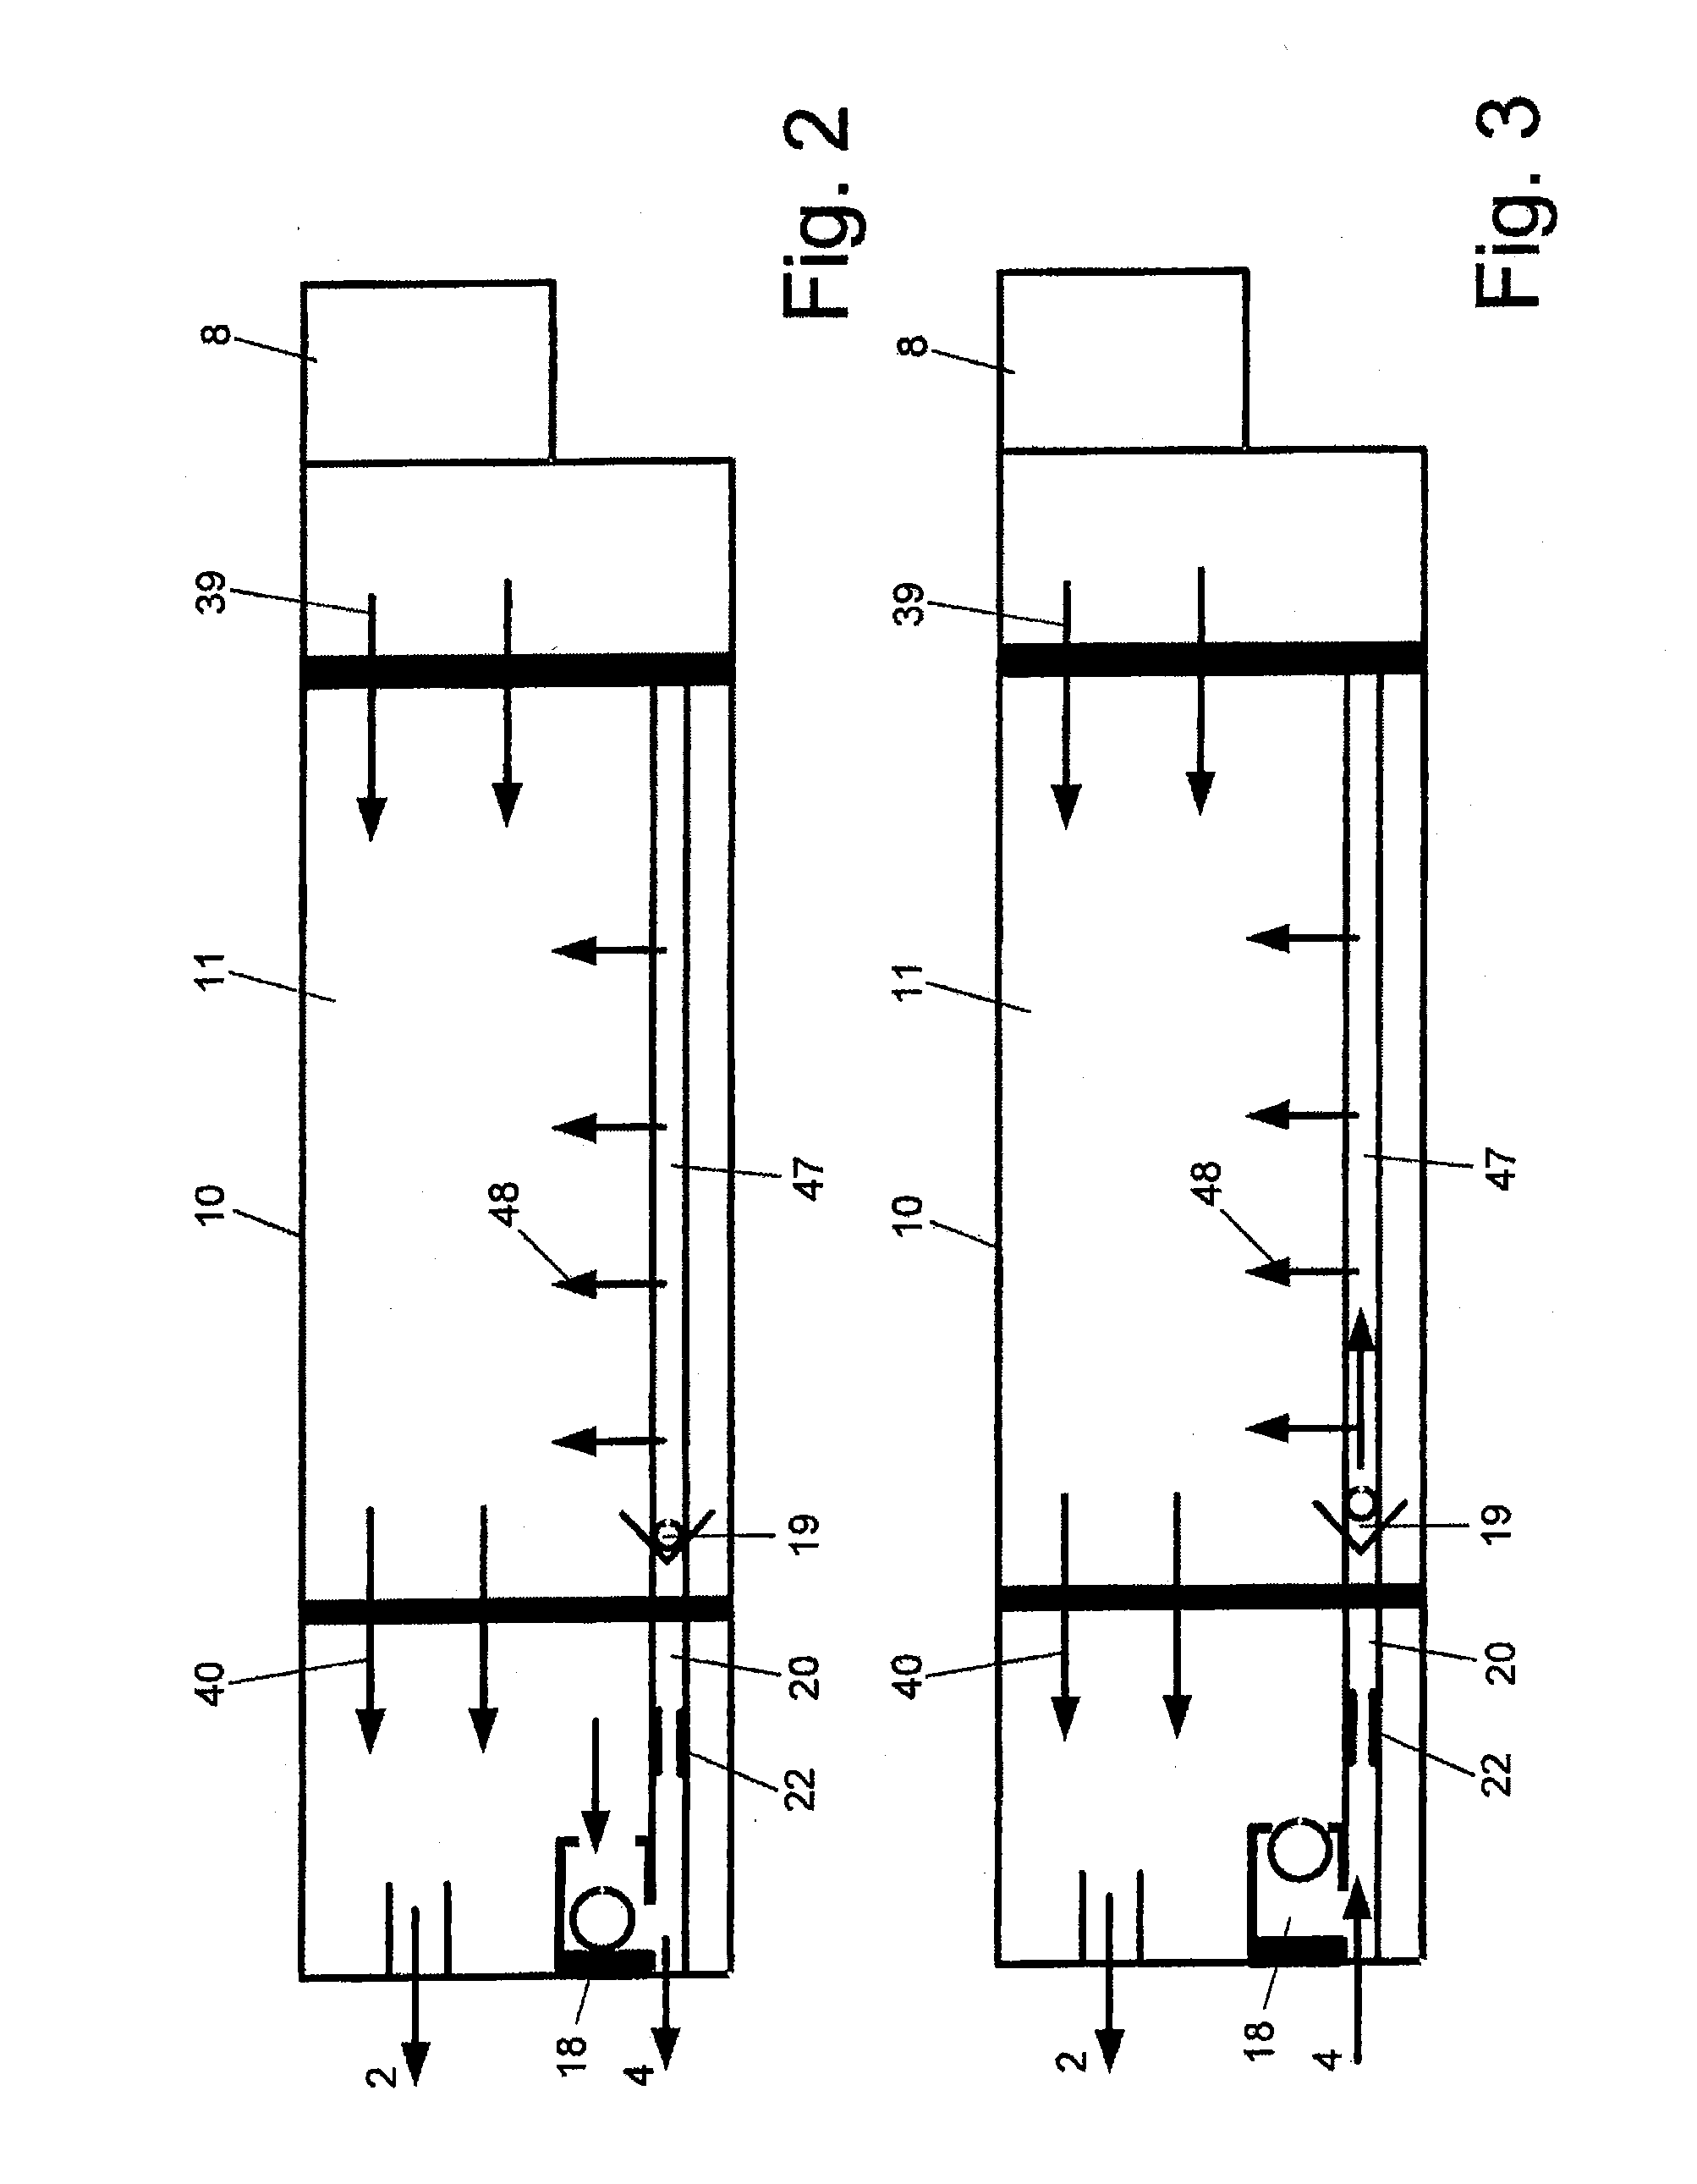 Closed ride control system for vehicles